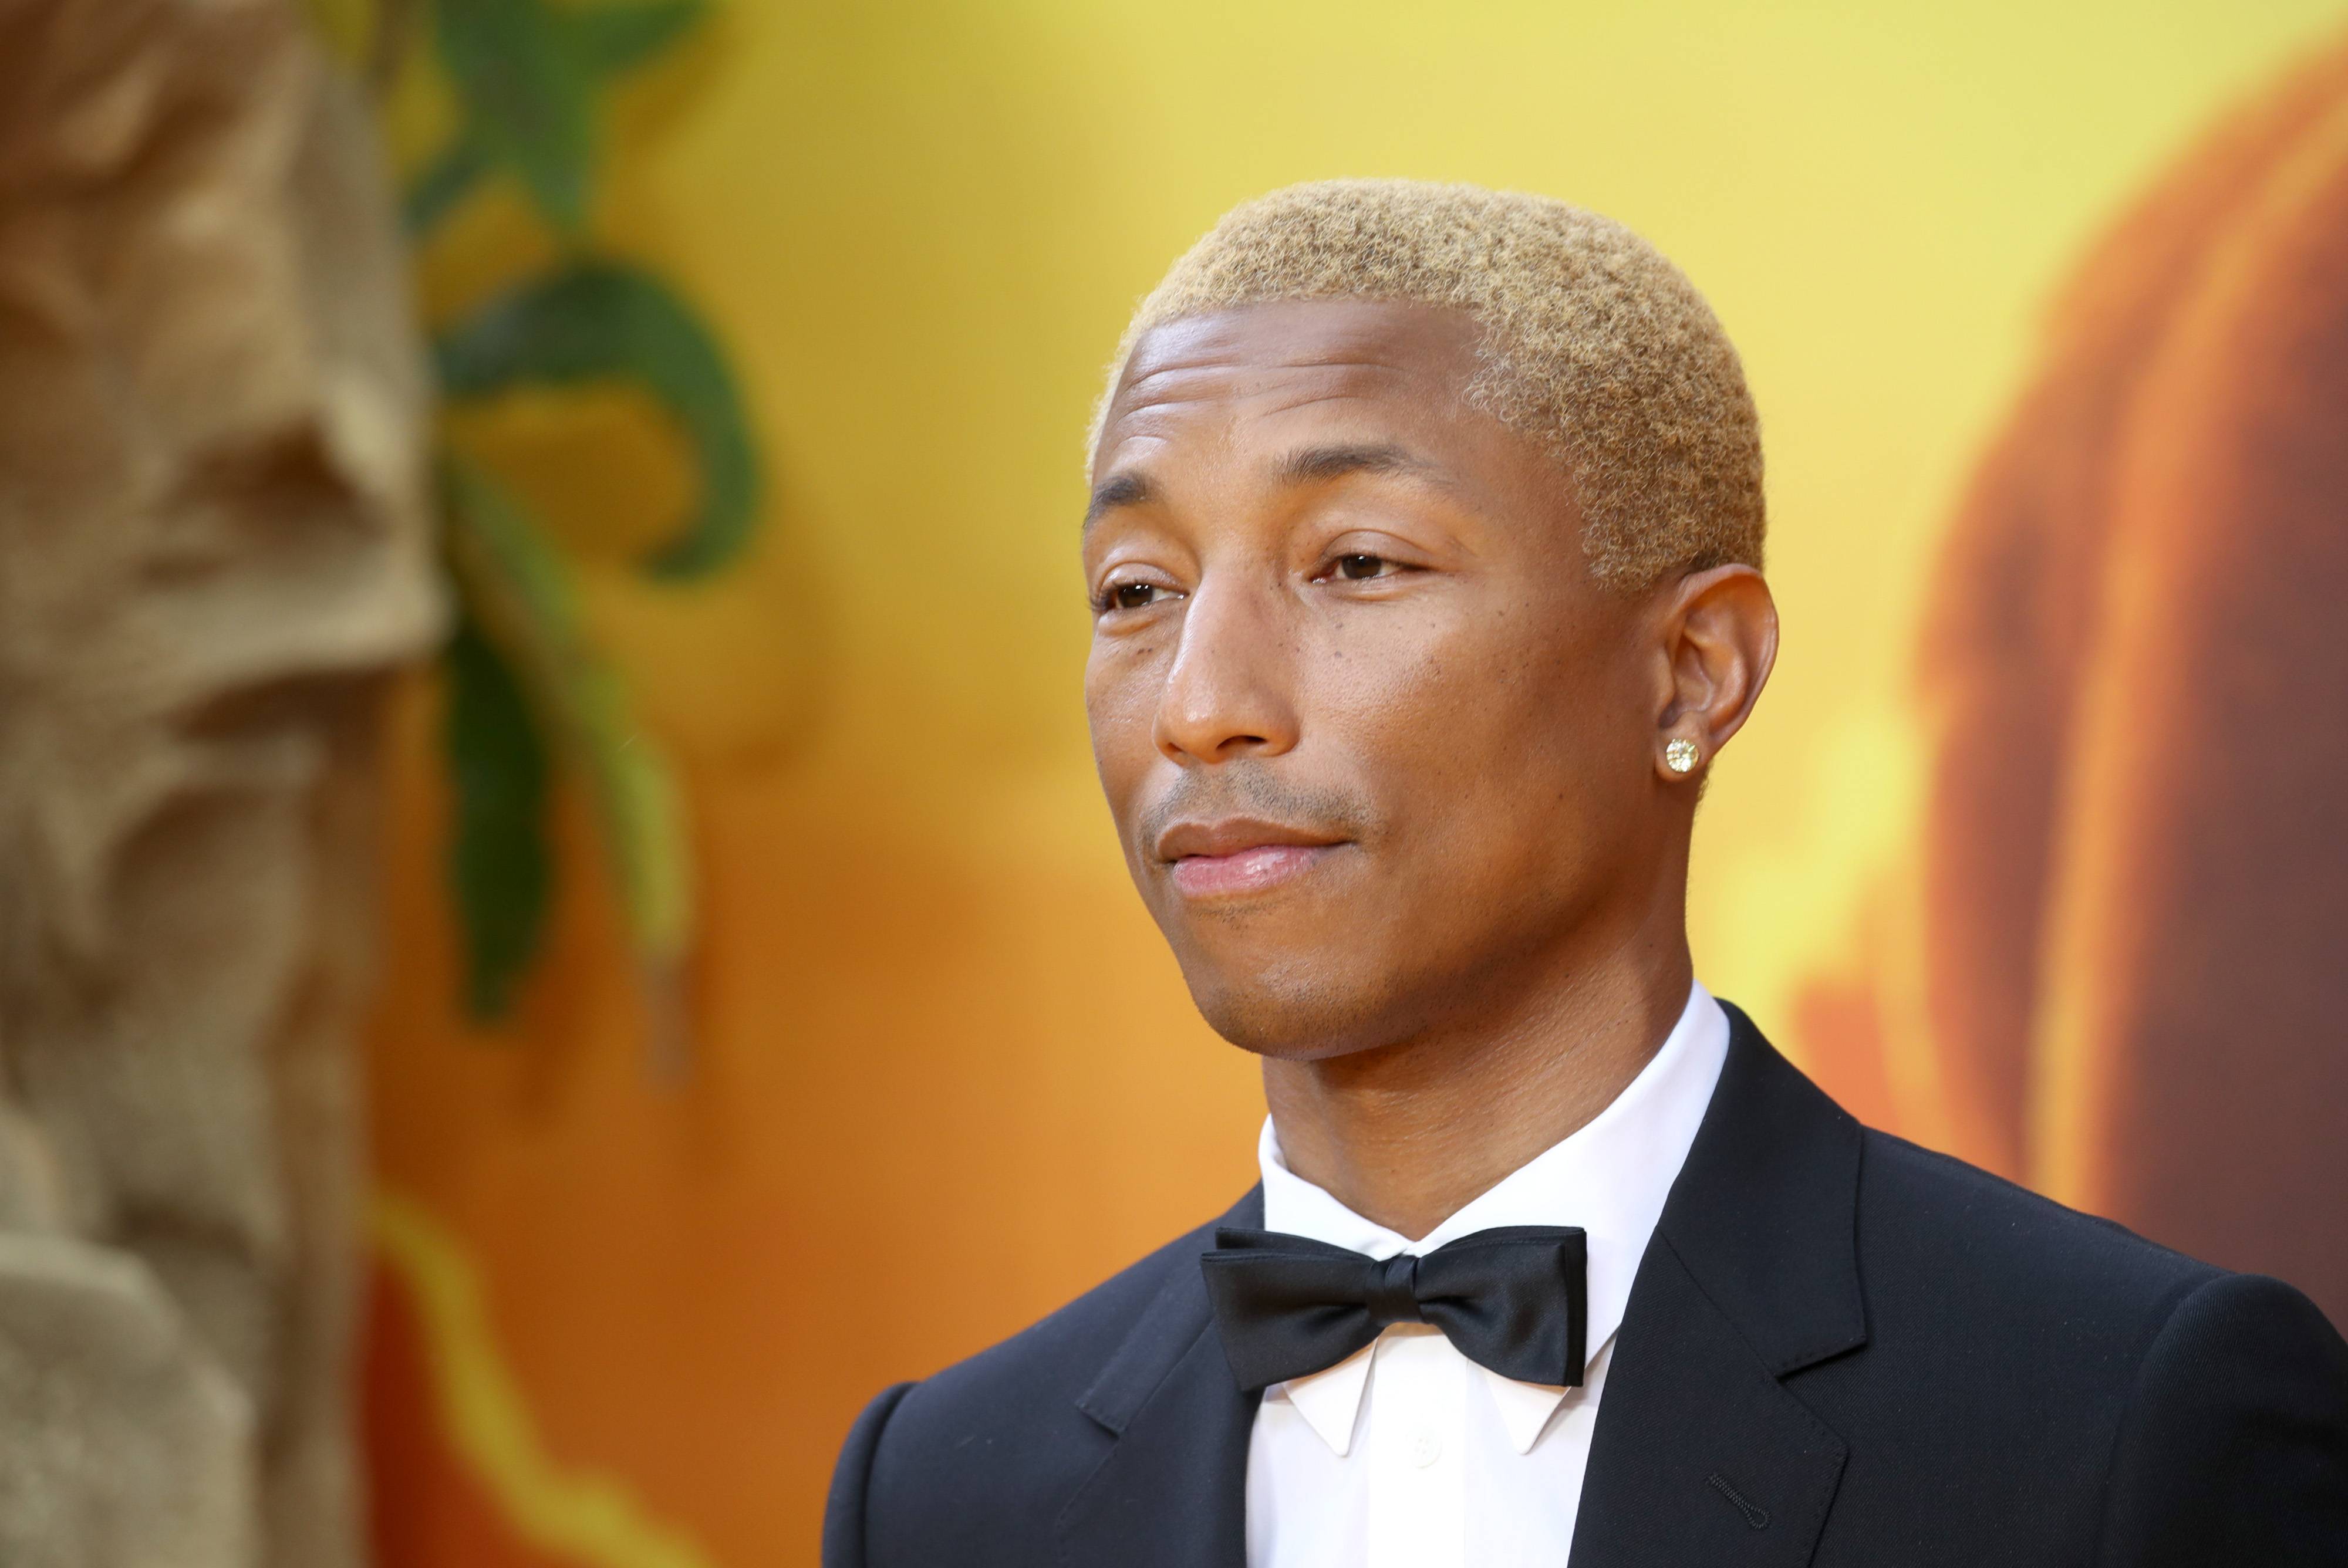 LONDON, ENGLAND - JULY 14: Pharrell Williams attends "The Lion King" European Premiere at Leicester Square on July 14, 2019 in London, England. (Photo by Mike Marsland/WireImage)